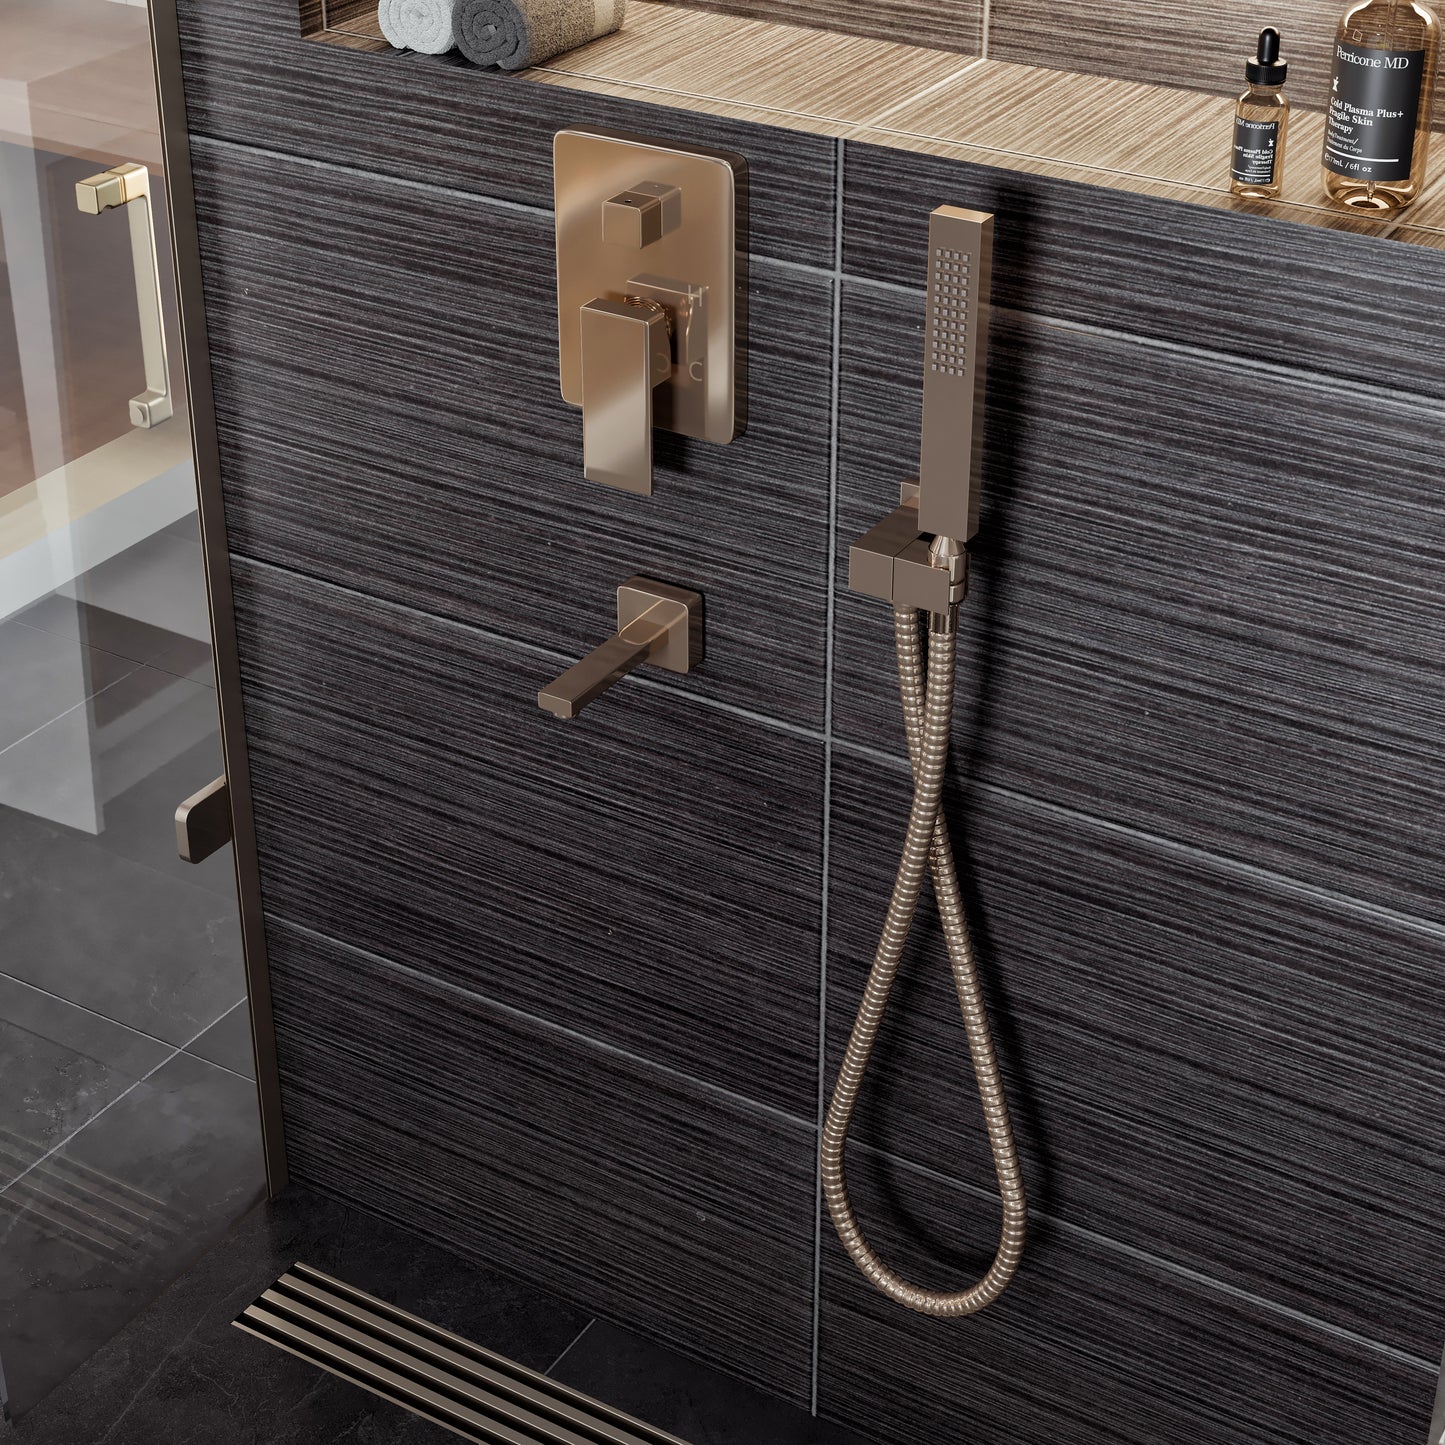 Eviva Beverly Shower and Tub Faucet Set in Brushed Nickel Finish